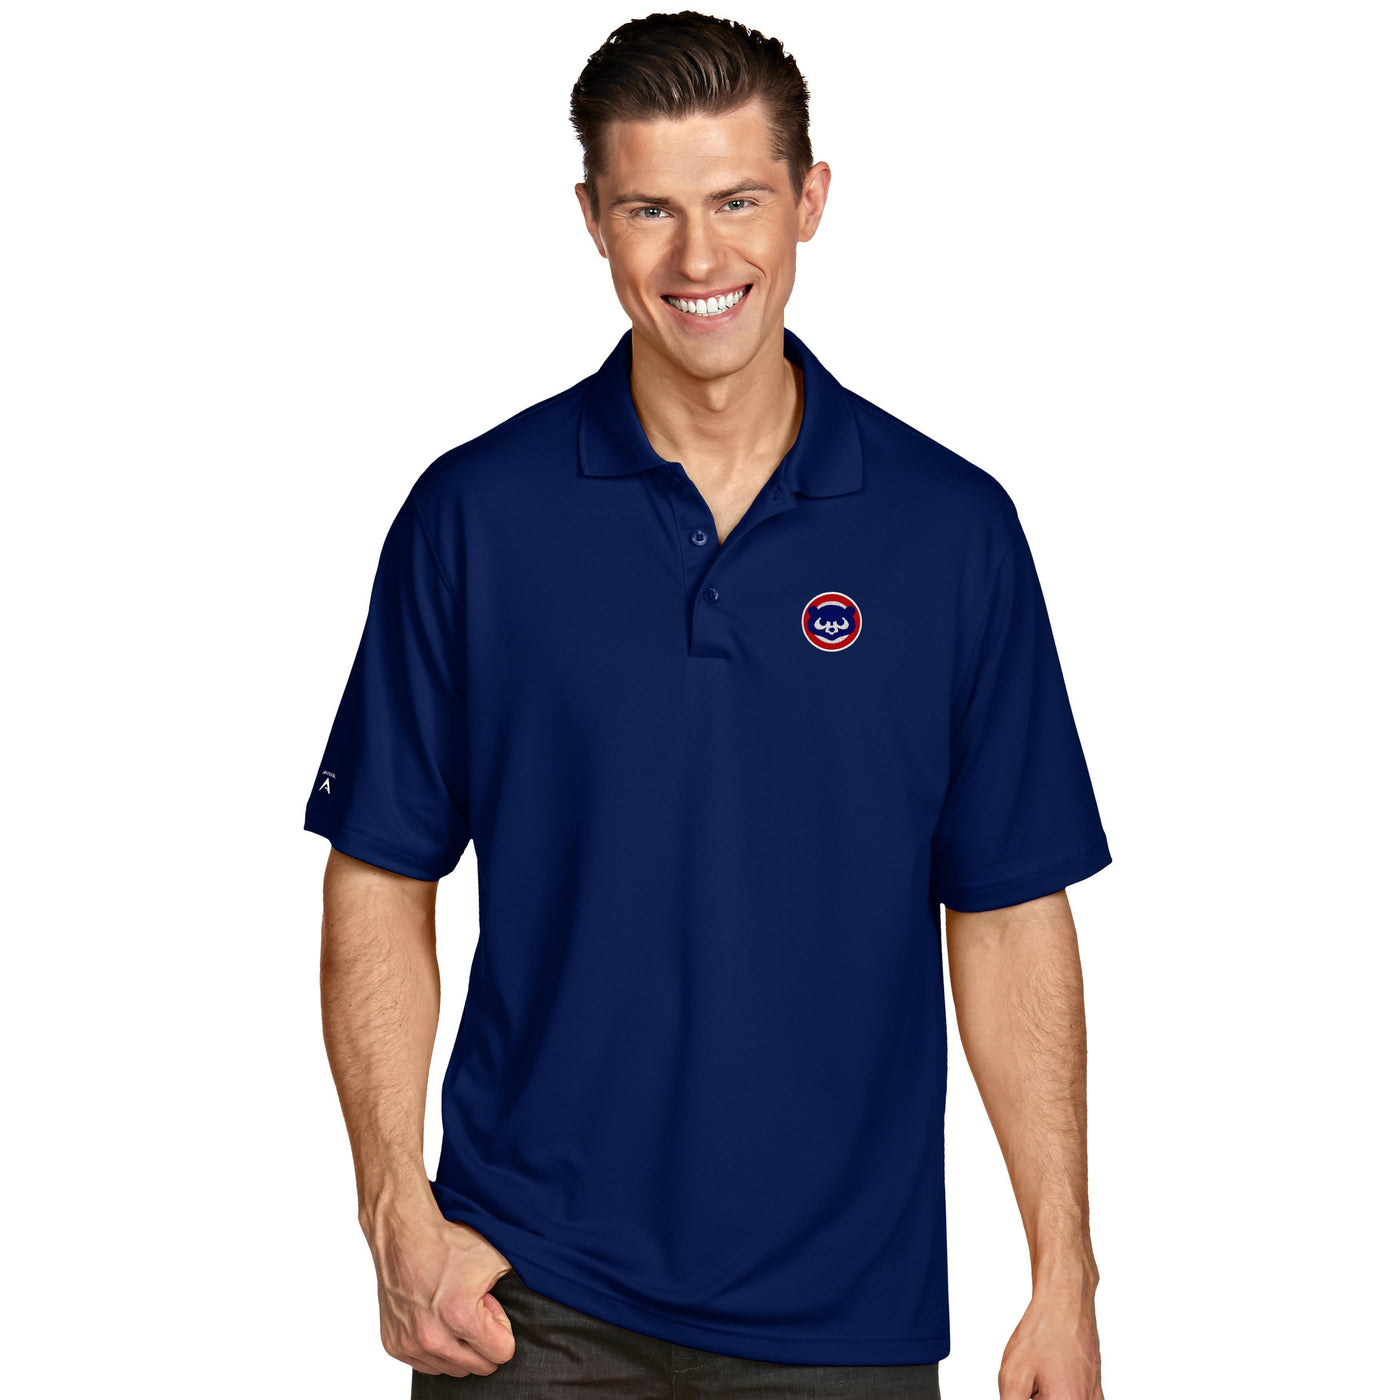 XTRA-LITE ROYAL 1984 CHICAGO CUBS POLO - Ivy Shop